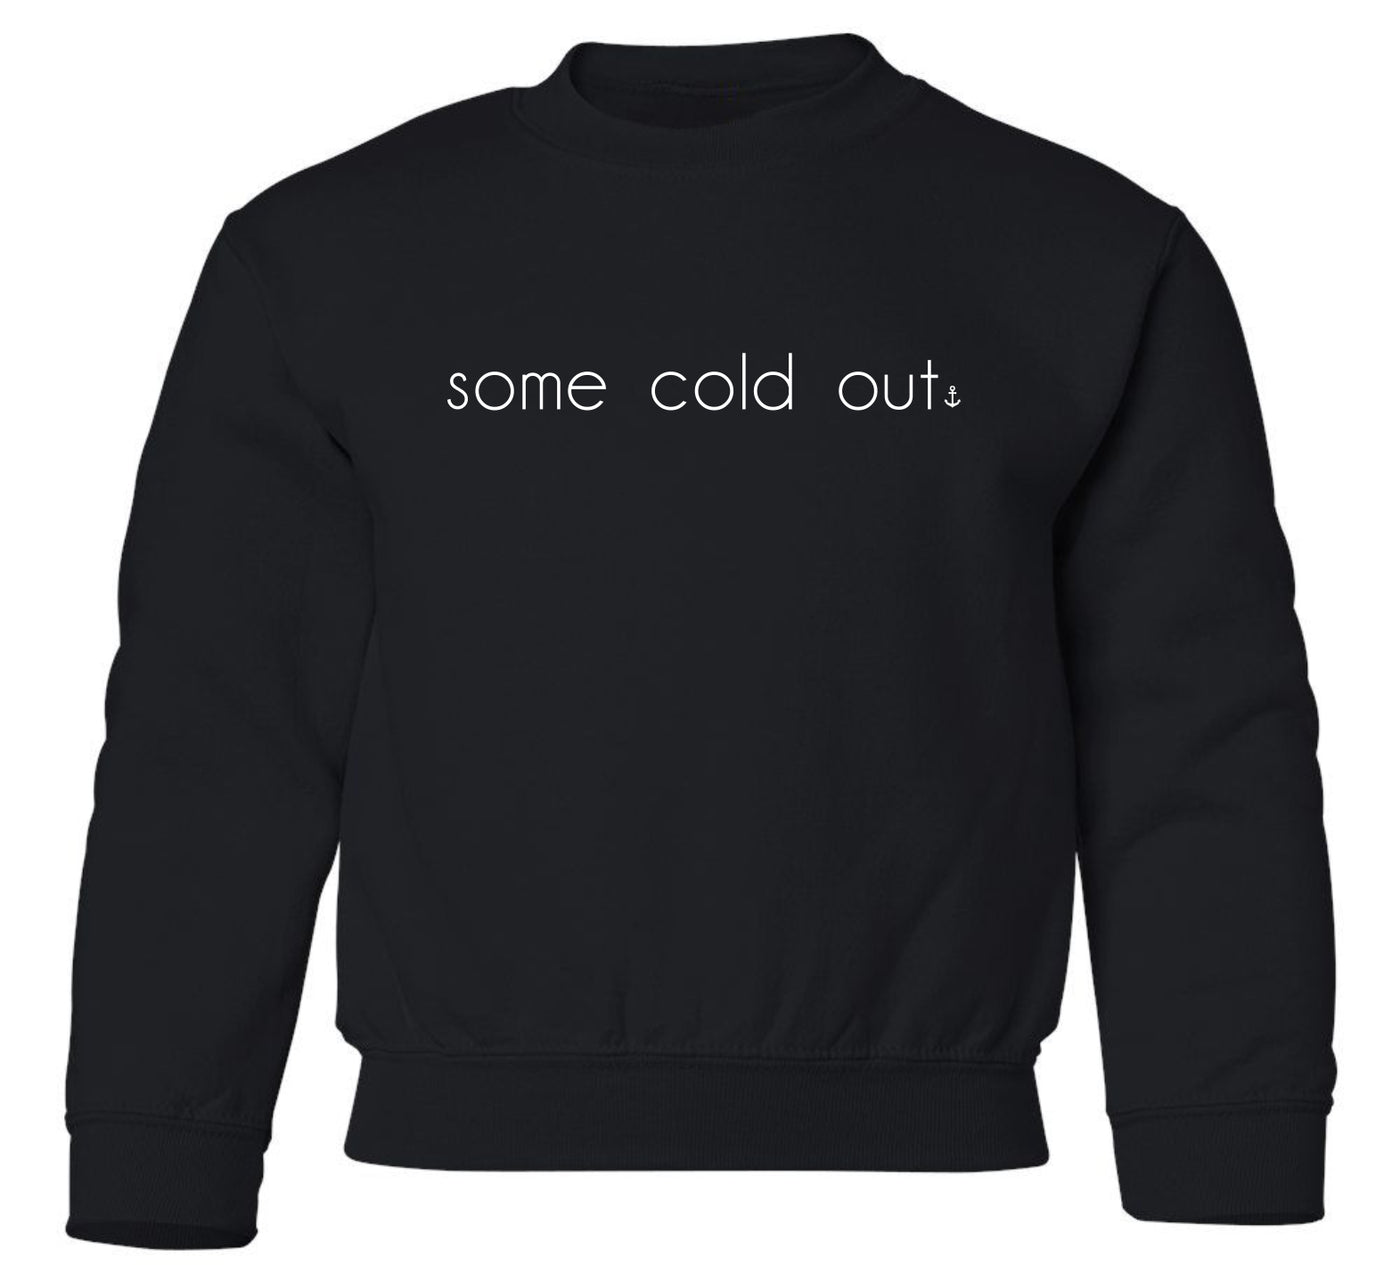 "Some Cold Out" Toddler/Youth Crewneck Sweatshirt